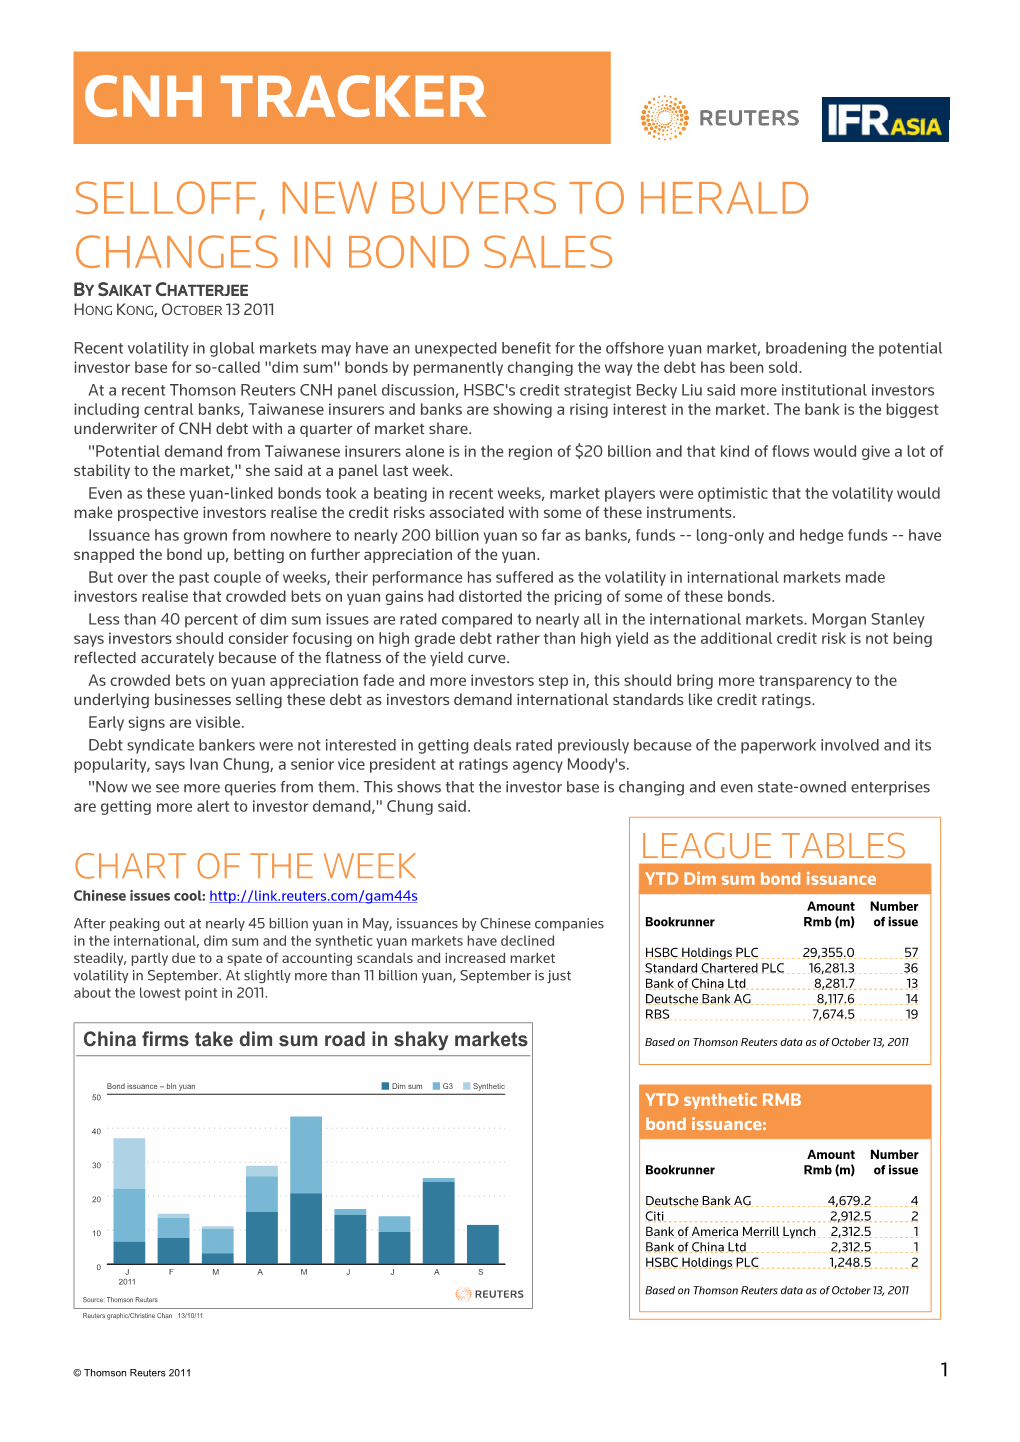 Cnh Tracker Selloff, New Buyers to Herald Changes in Bond Sales by Saikat Chatterjee Hong Kong, October 13 2011